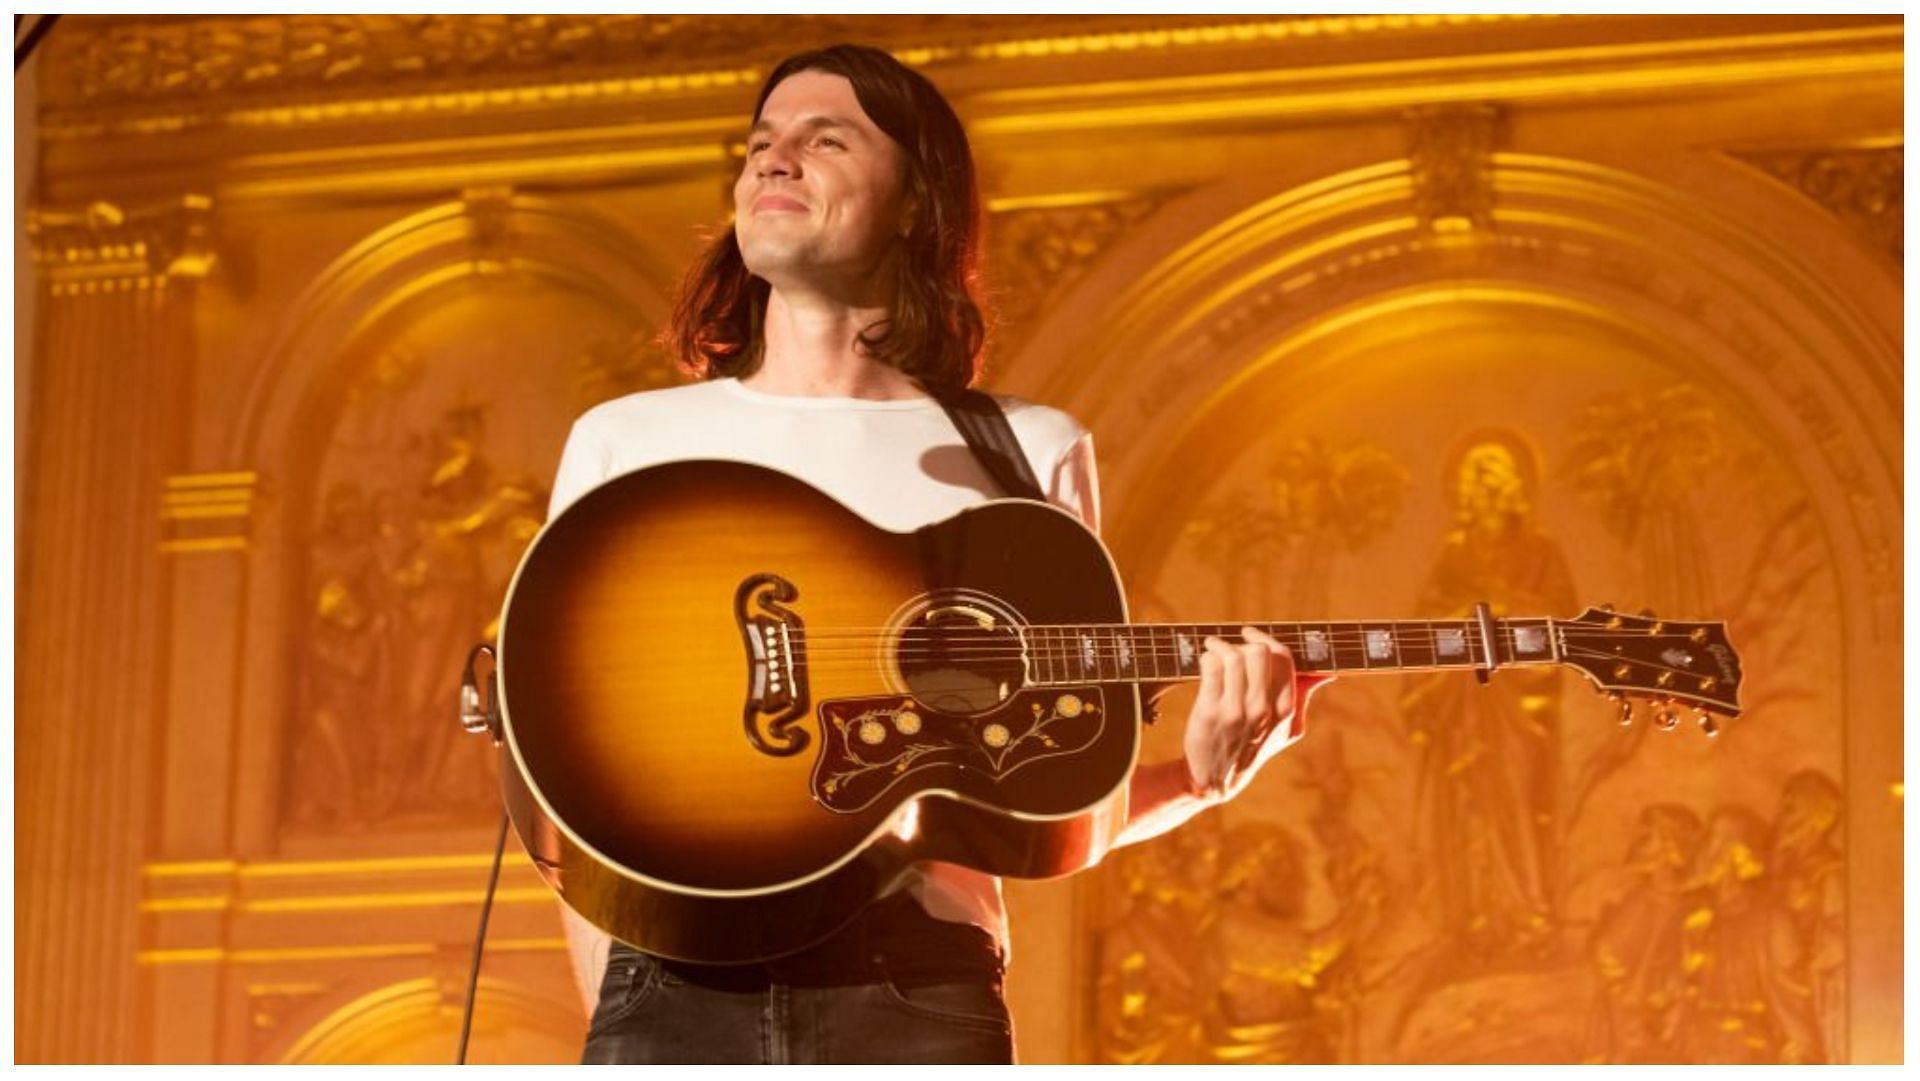 James Bay is a famous singer, songwriter and guitarist (Image via Burak Cingi/Getty Images)